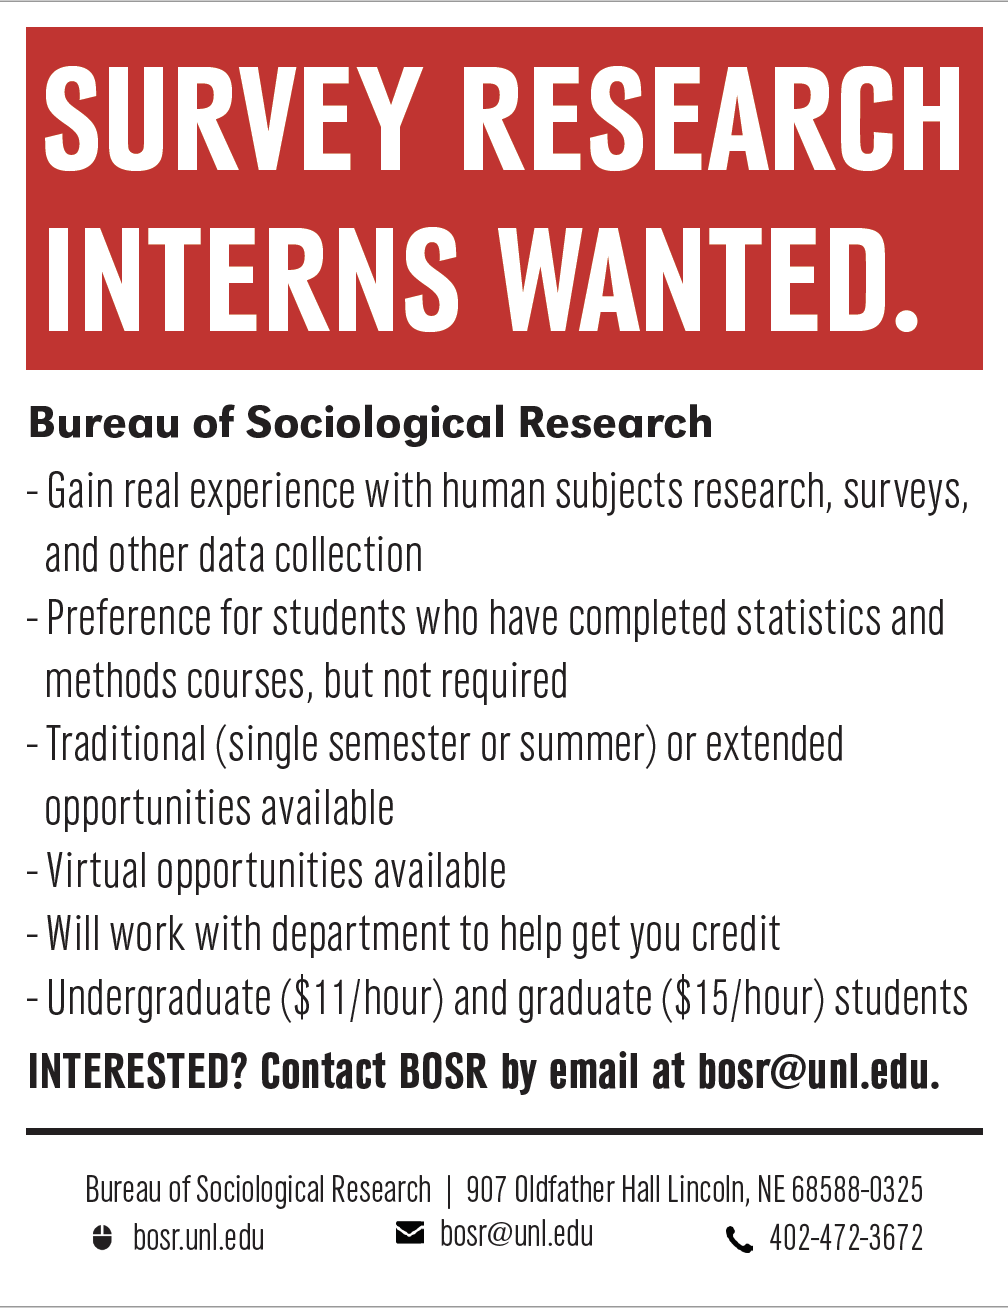 Graduate students hired to become survey research interns will receive $15/hour.